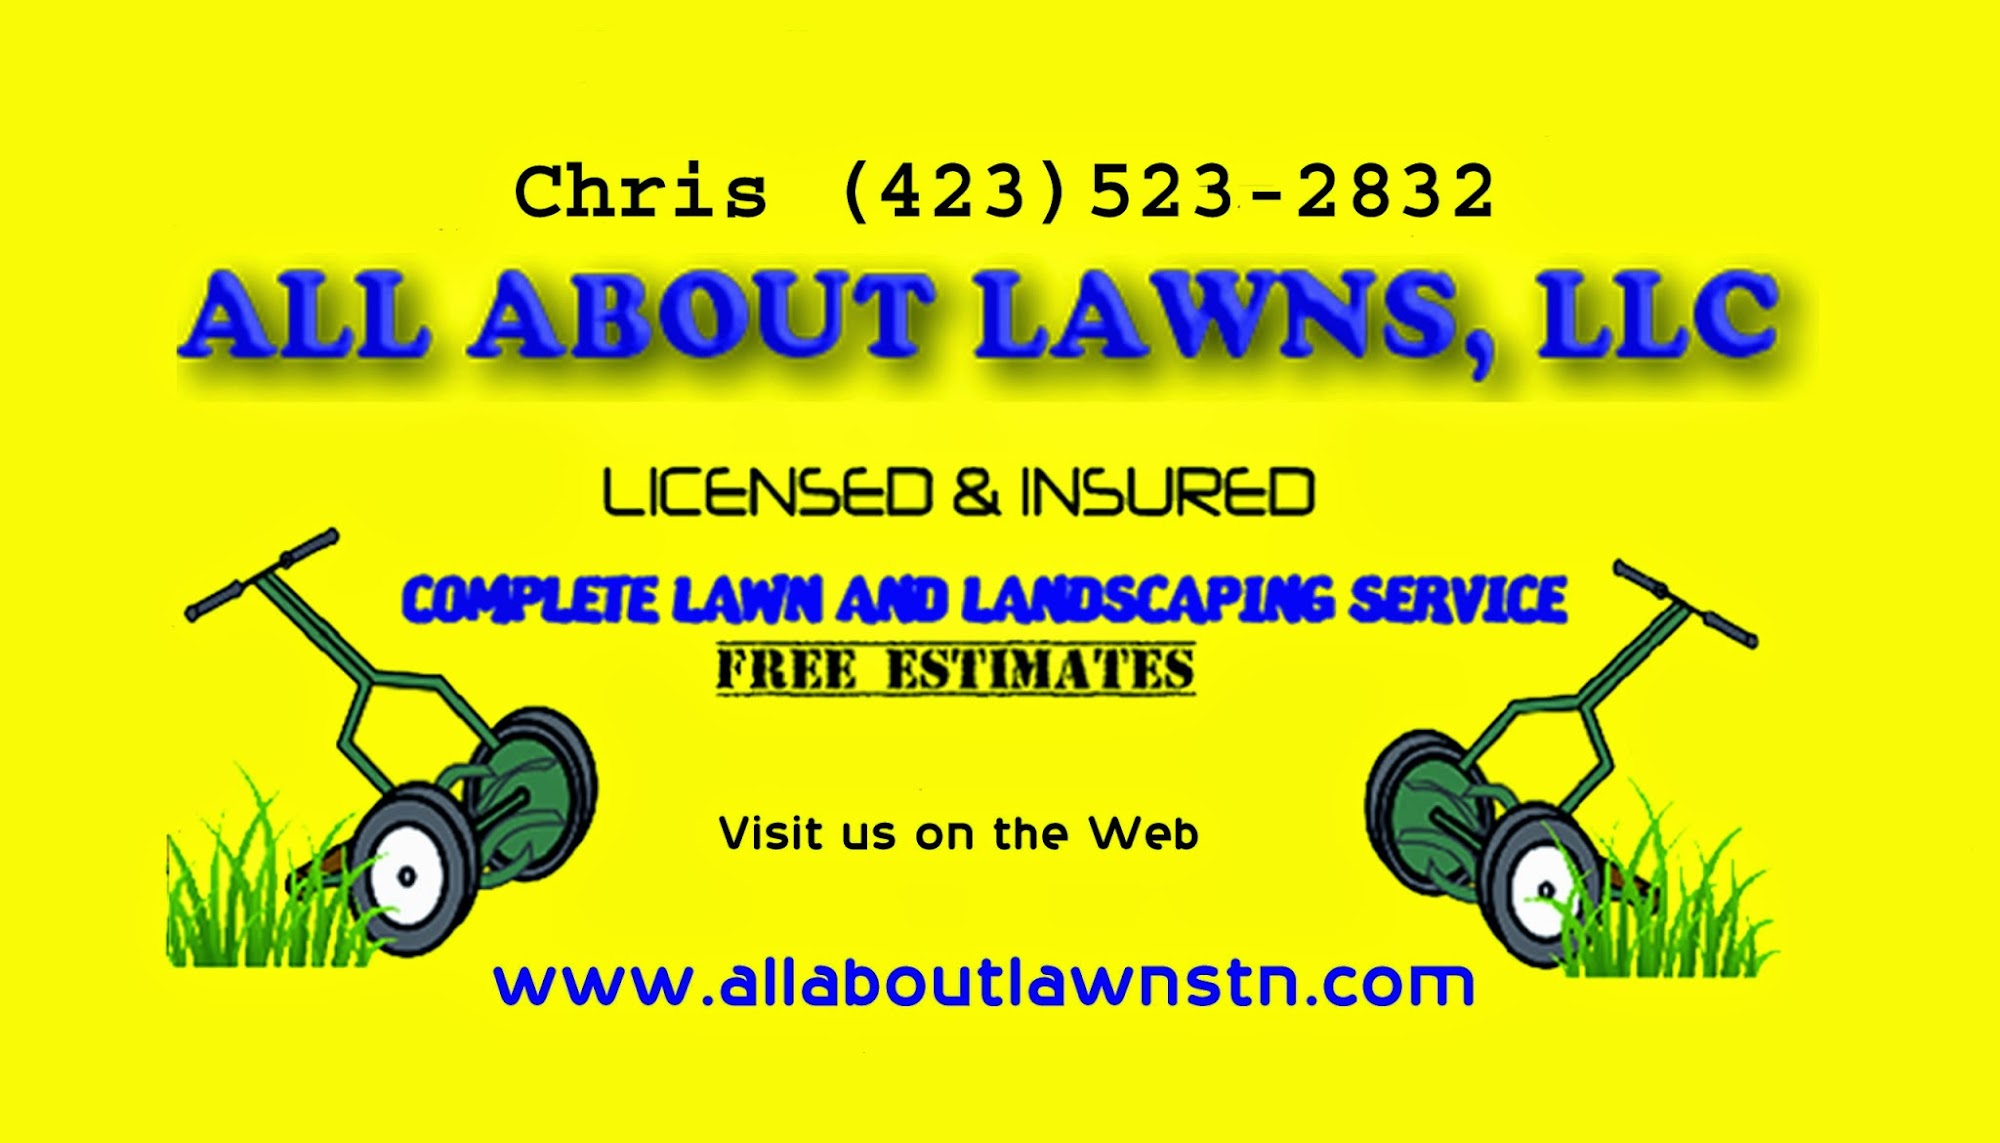 All About Lawns and Landscaping, LLC